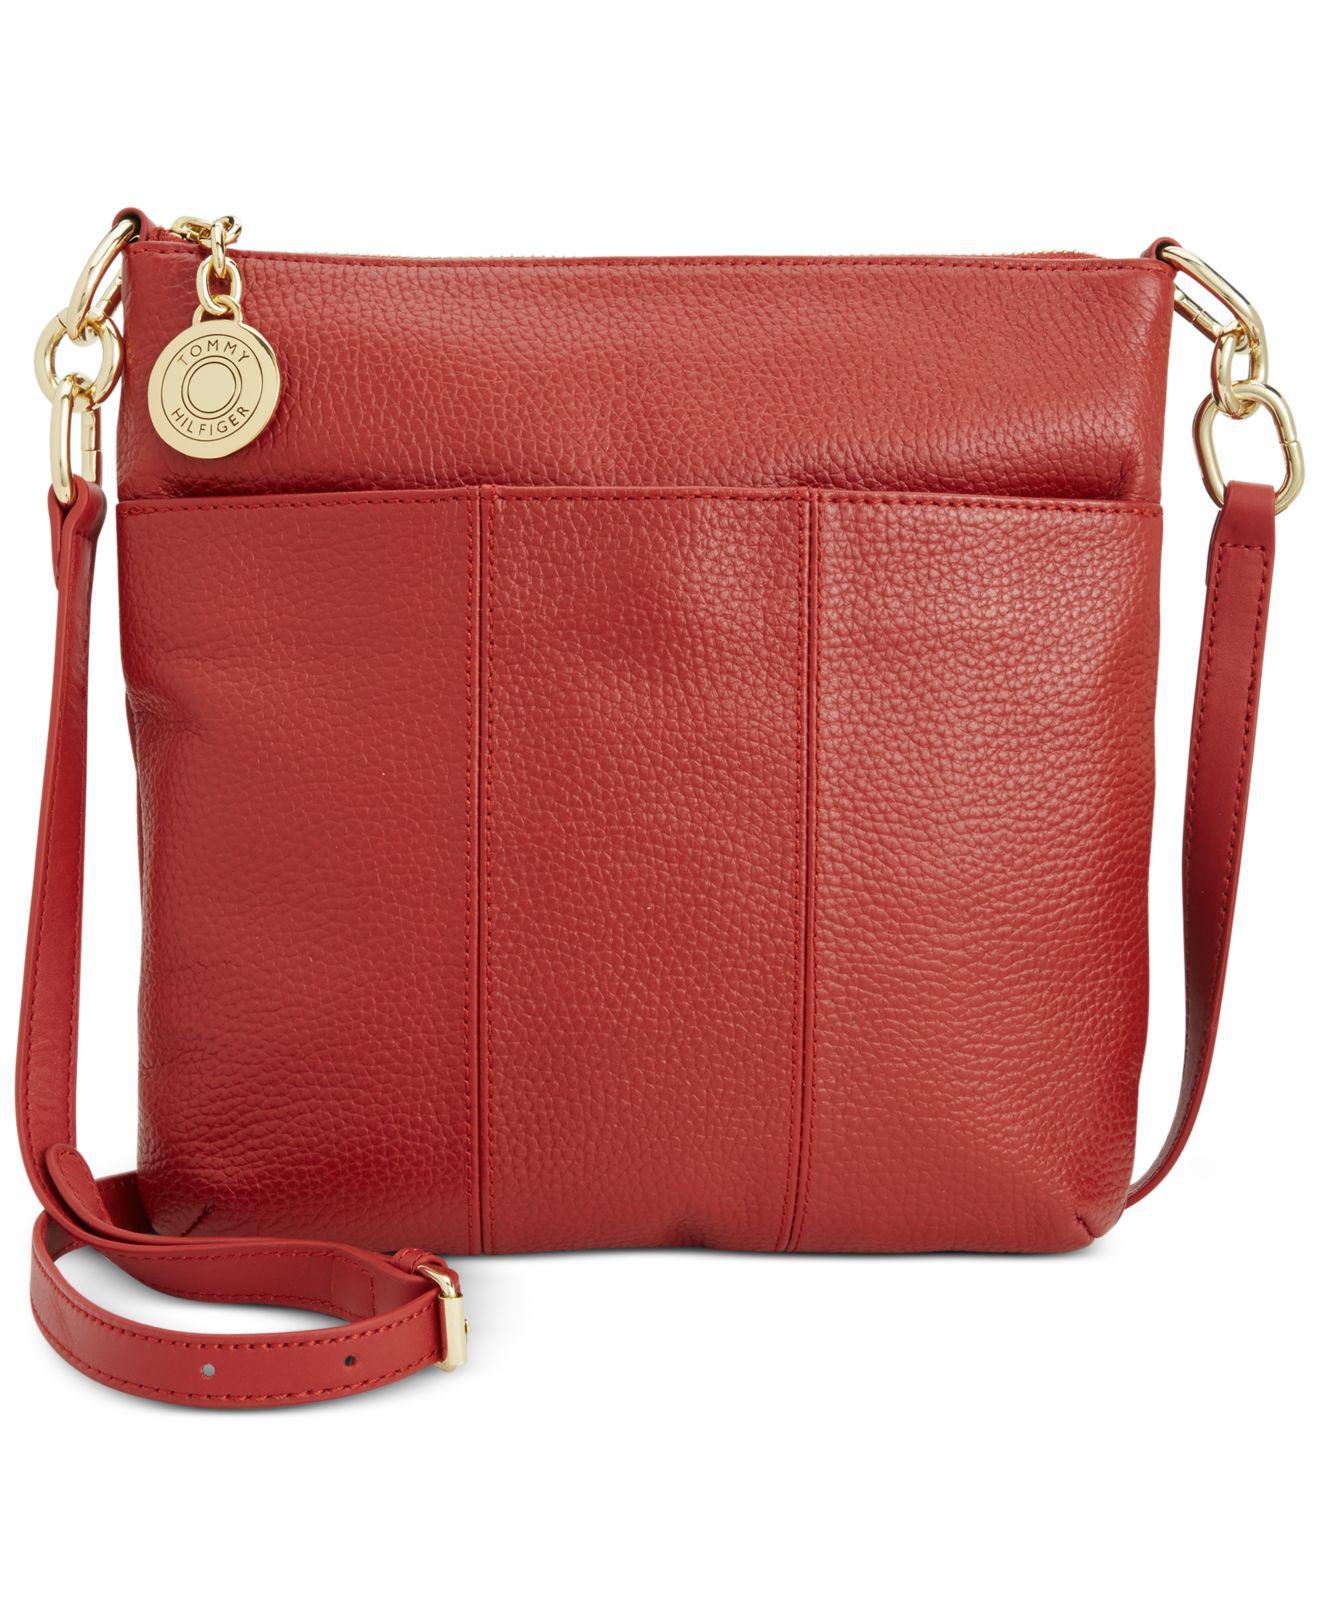 Lyst - Tommy Hilfiger Th Signature Pebble Leather Crossbody in Red